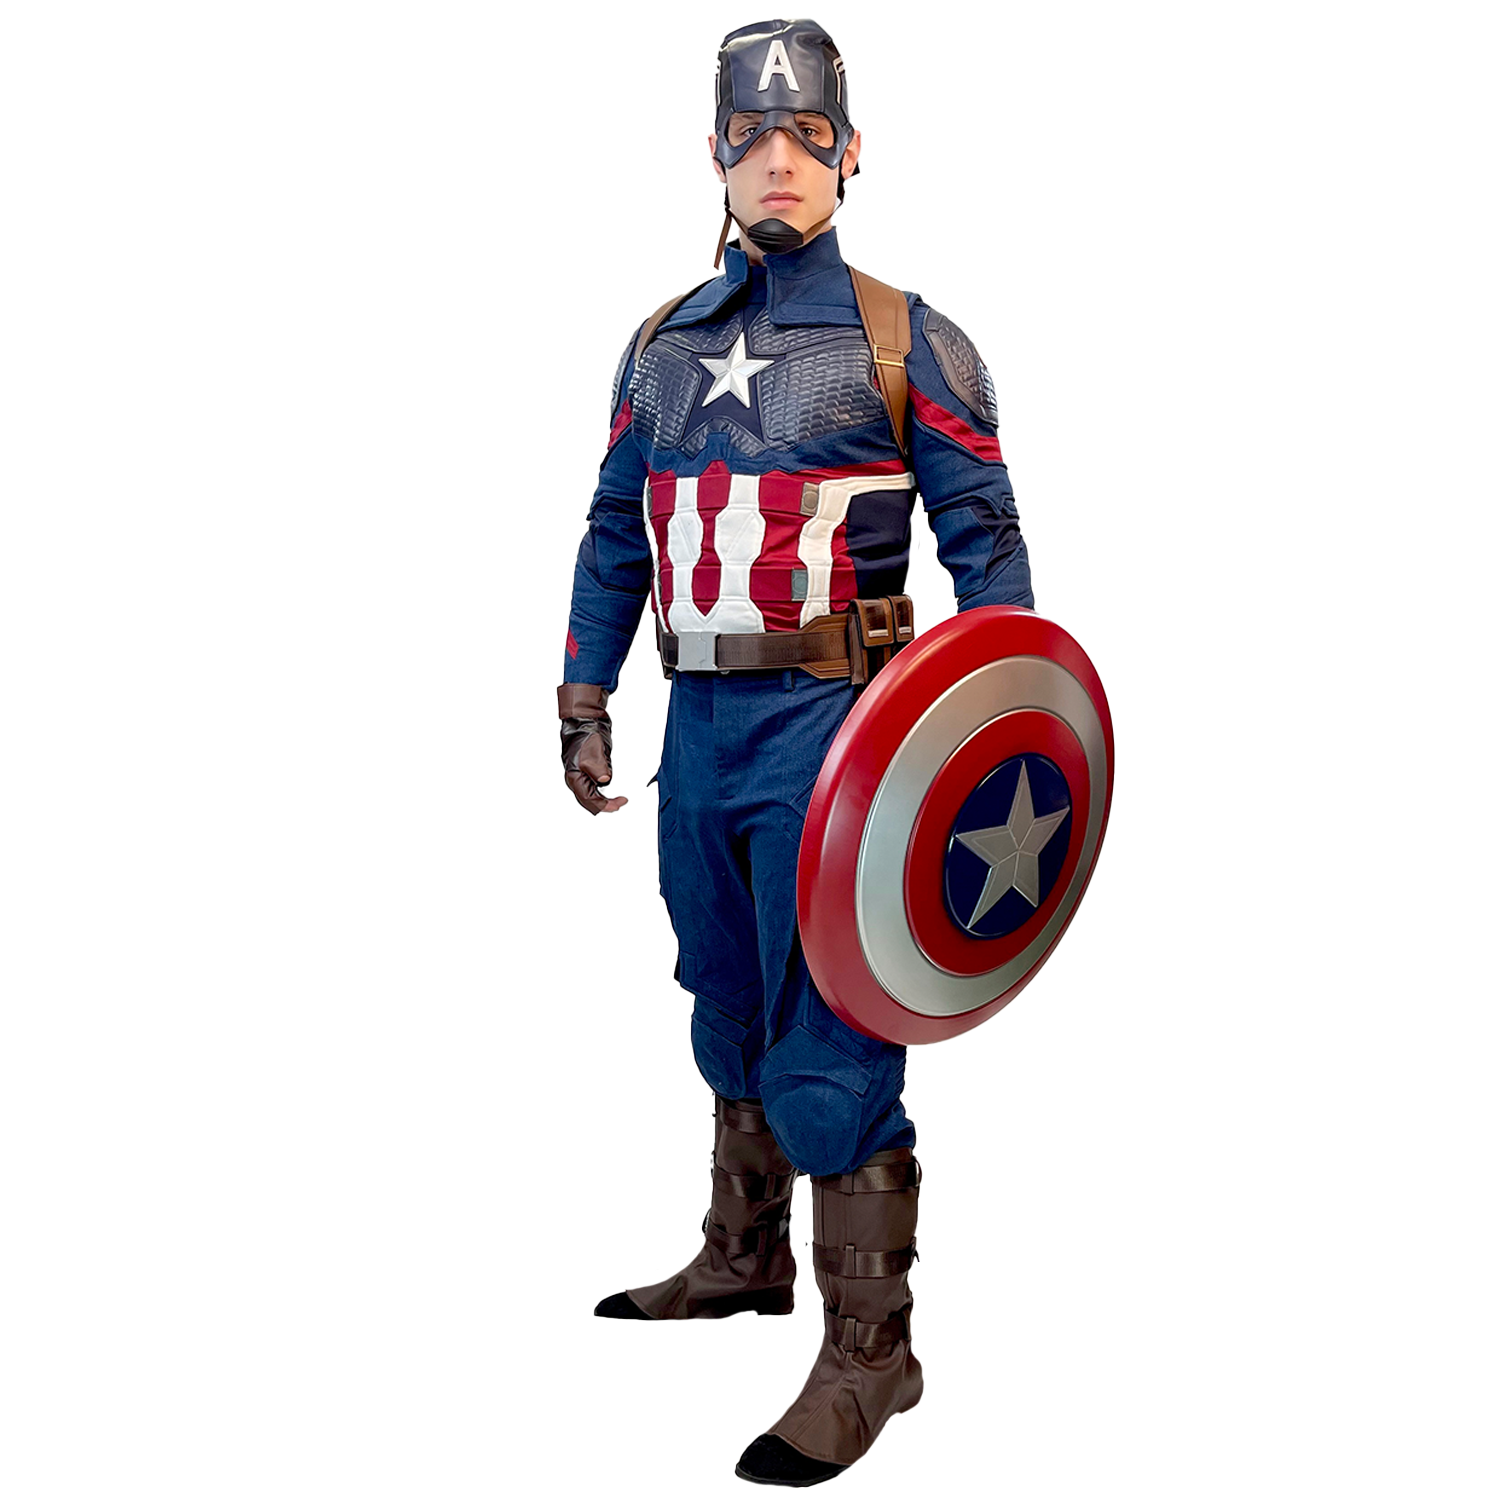 Deluxe Inspired Captain America Professional Cosplay Adult Costume